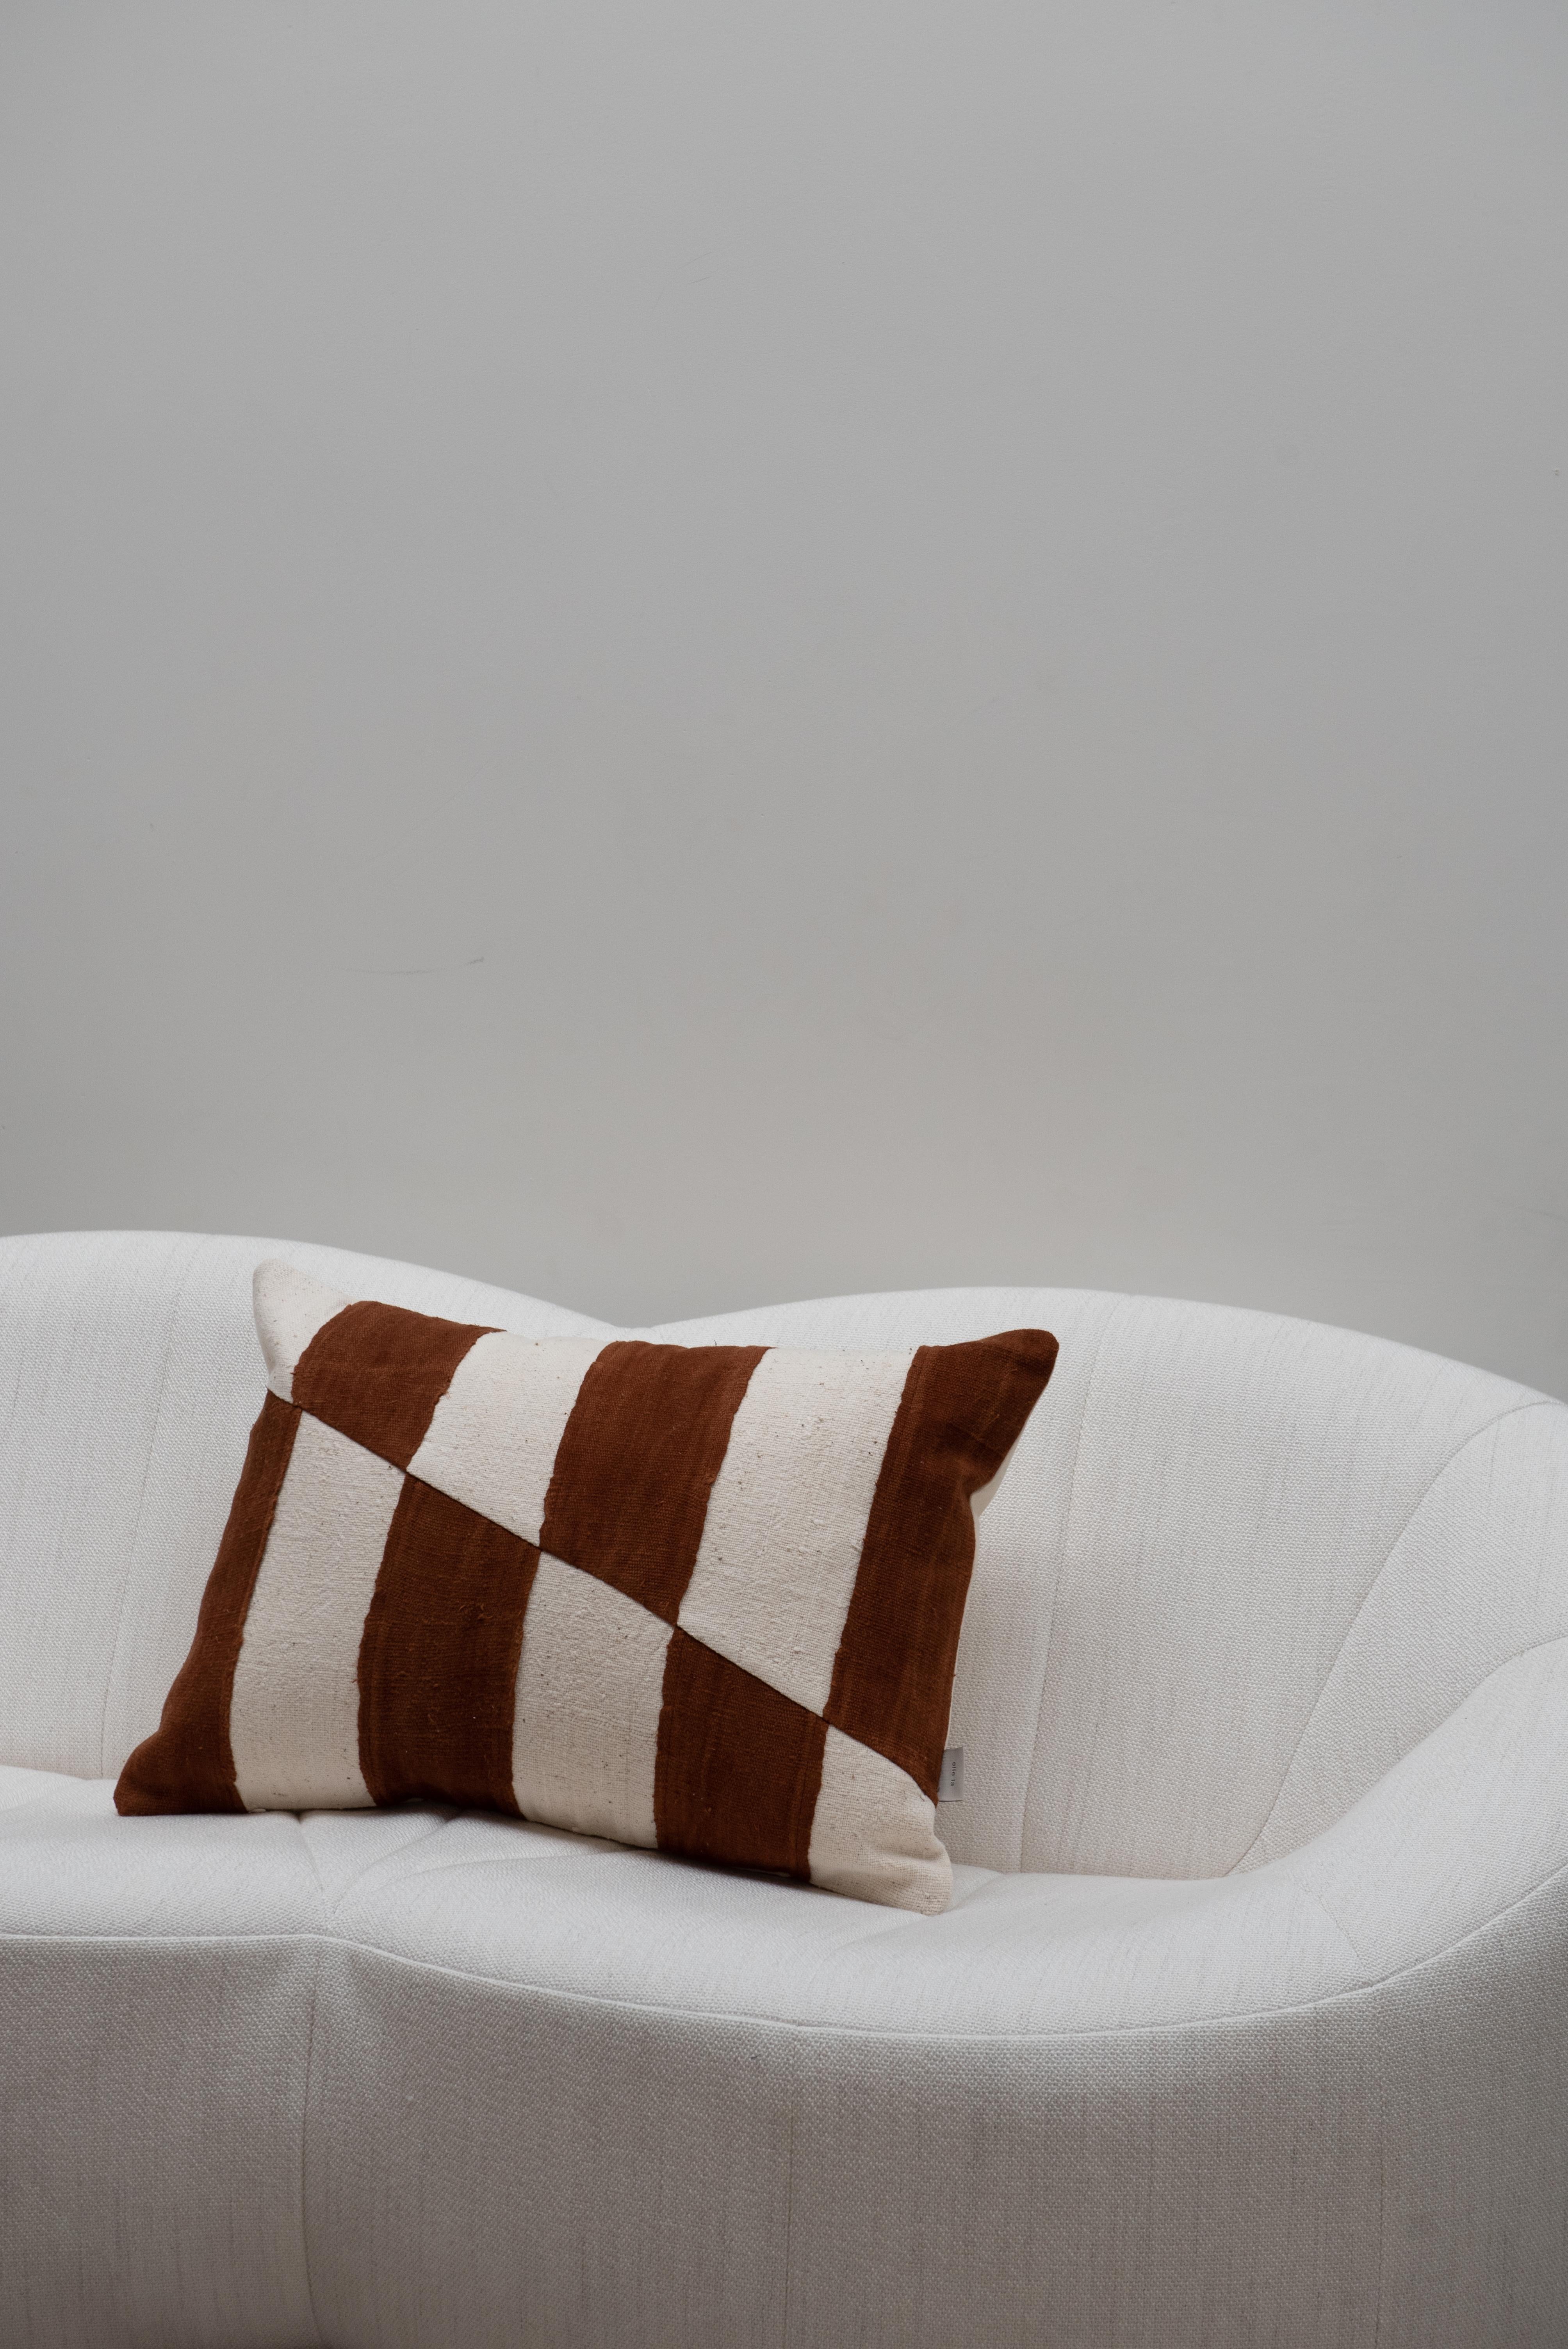 This white fabric is handwoven and plant- dyed in the Dogon region of Mali. The cotton is traditionally handpicked, spun and woven into small strips, which can still be seen in this cushion. All final designs and manufacturing takes place in a small